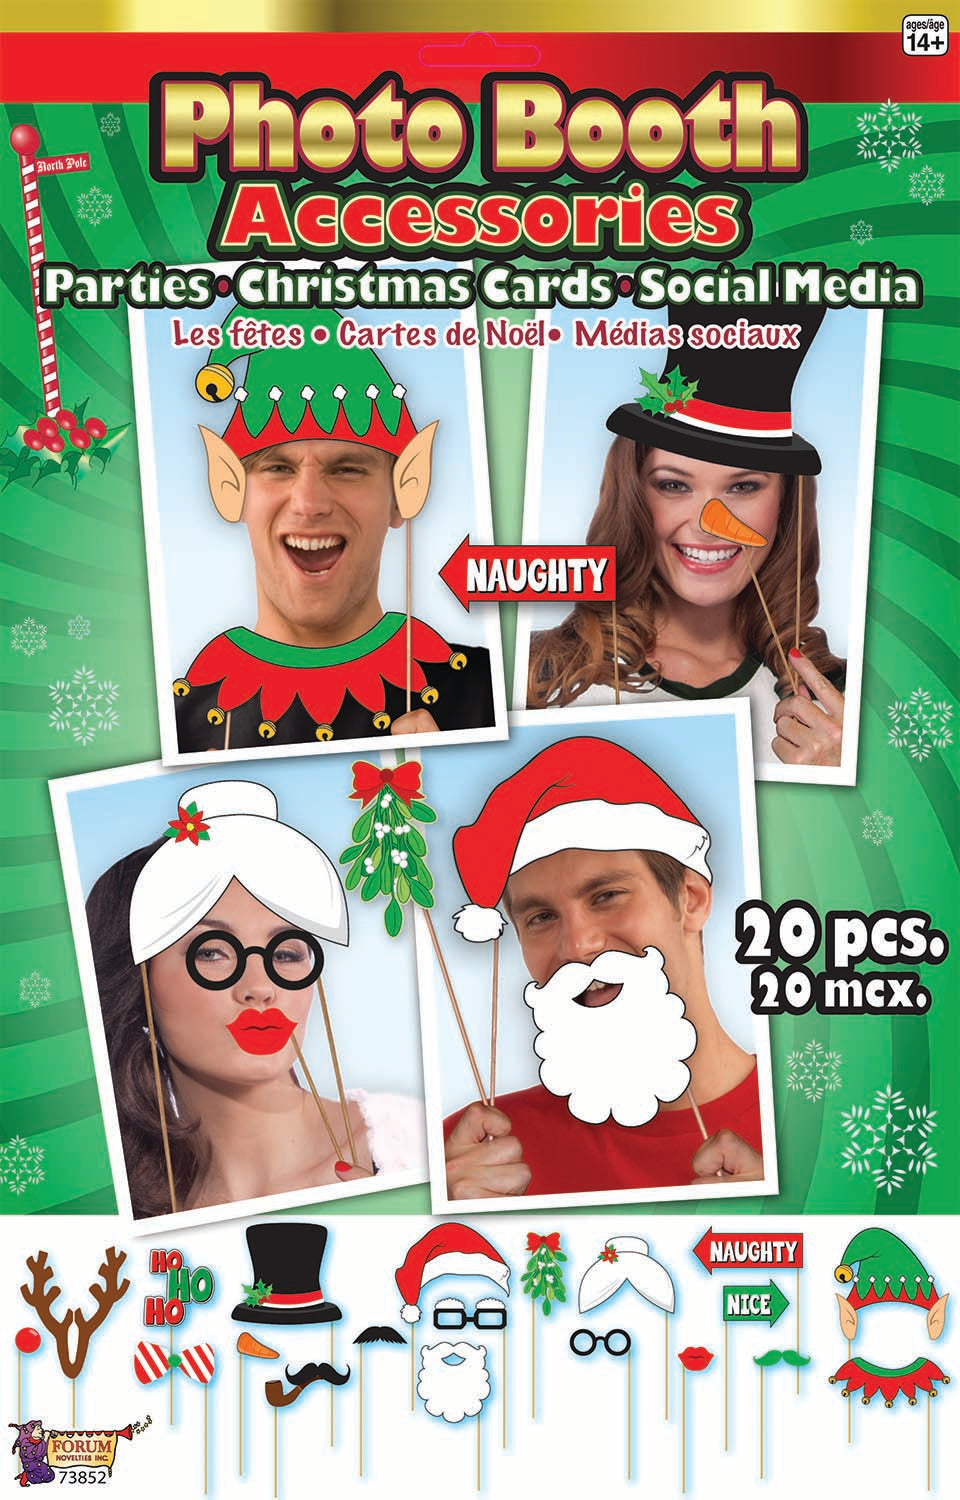 Christmas Photo Booth Accessories